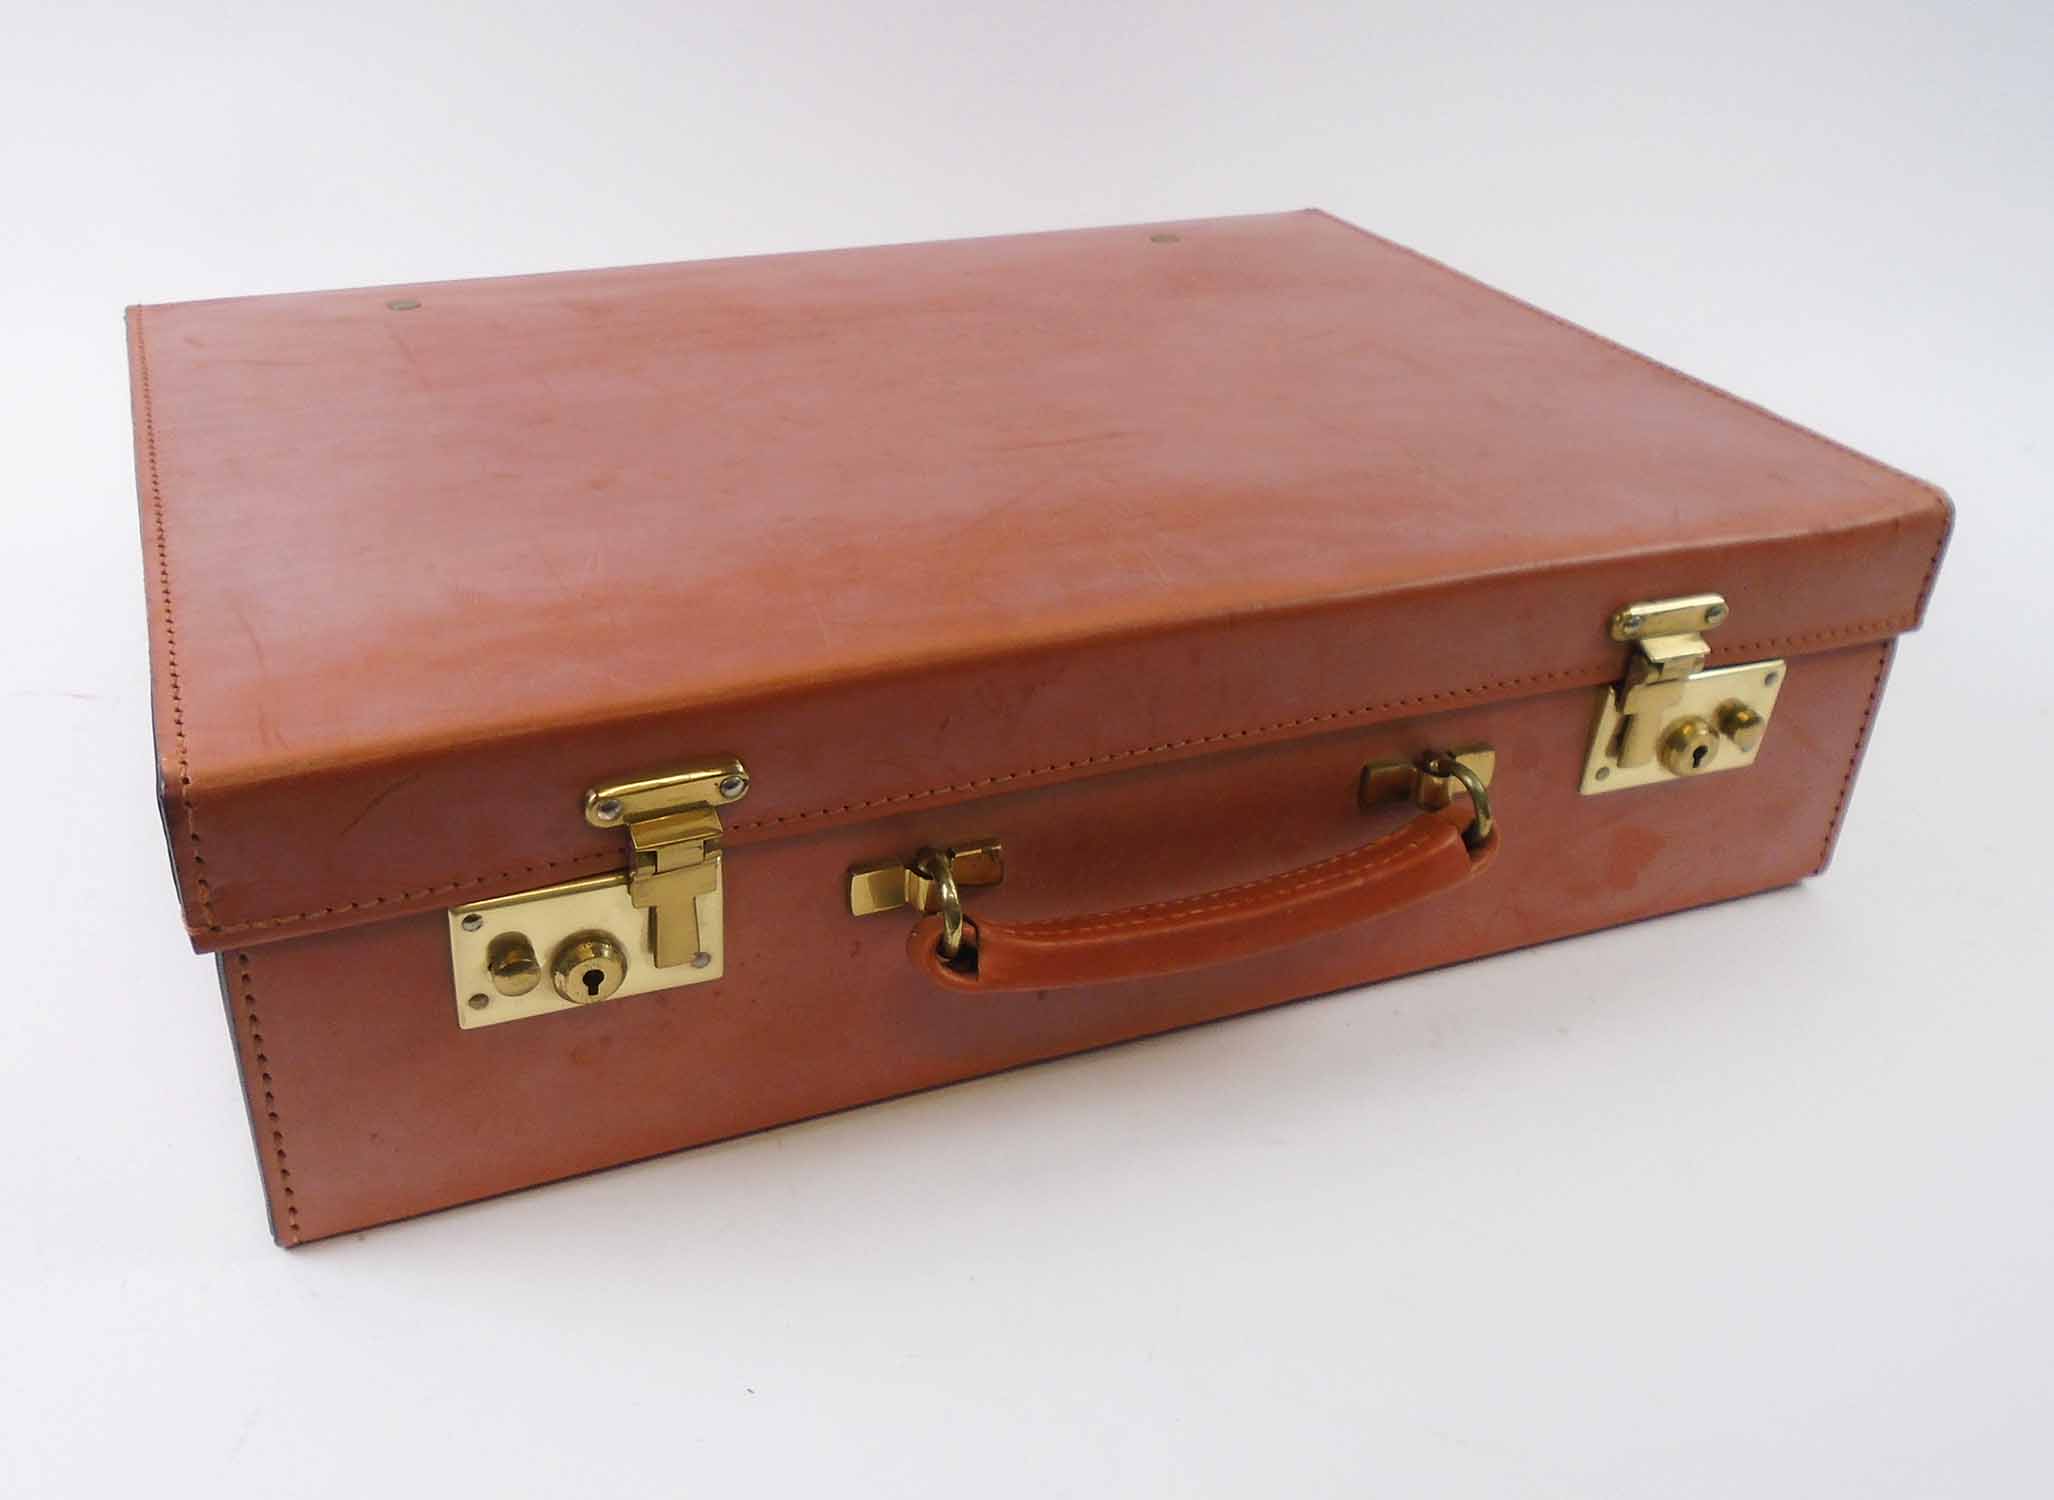 Sold at Auction: SWAINE ADENEY BRIGG LIMITED A FINE LEATHER MINI